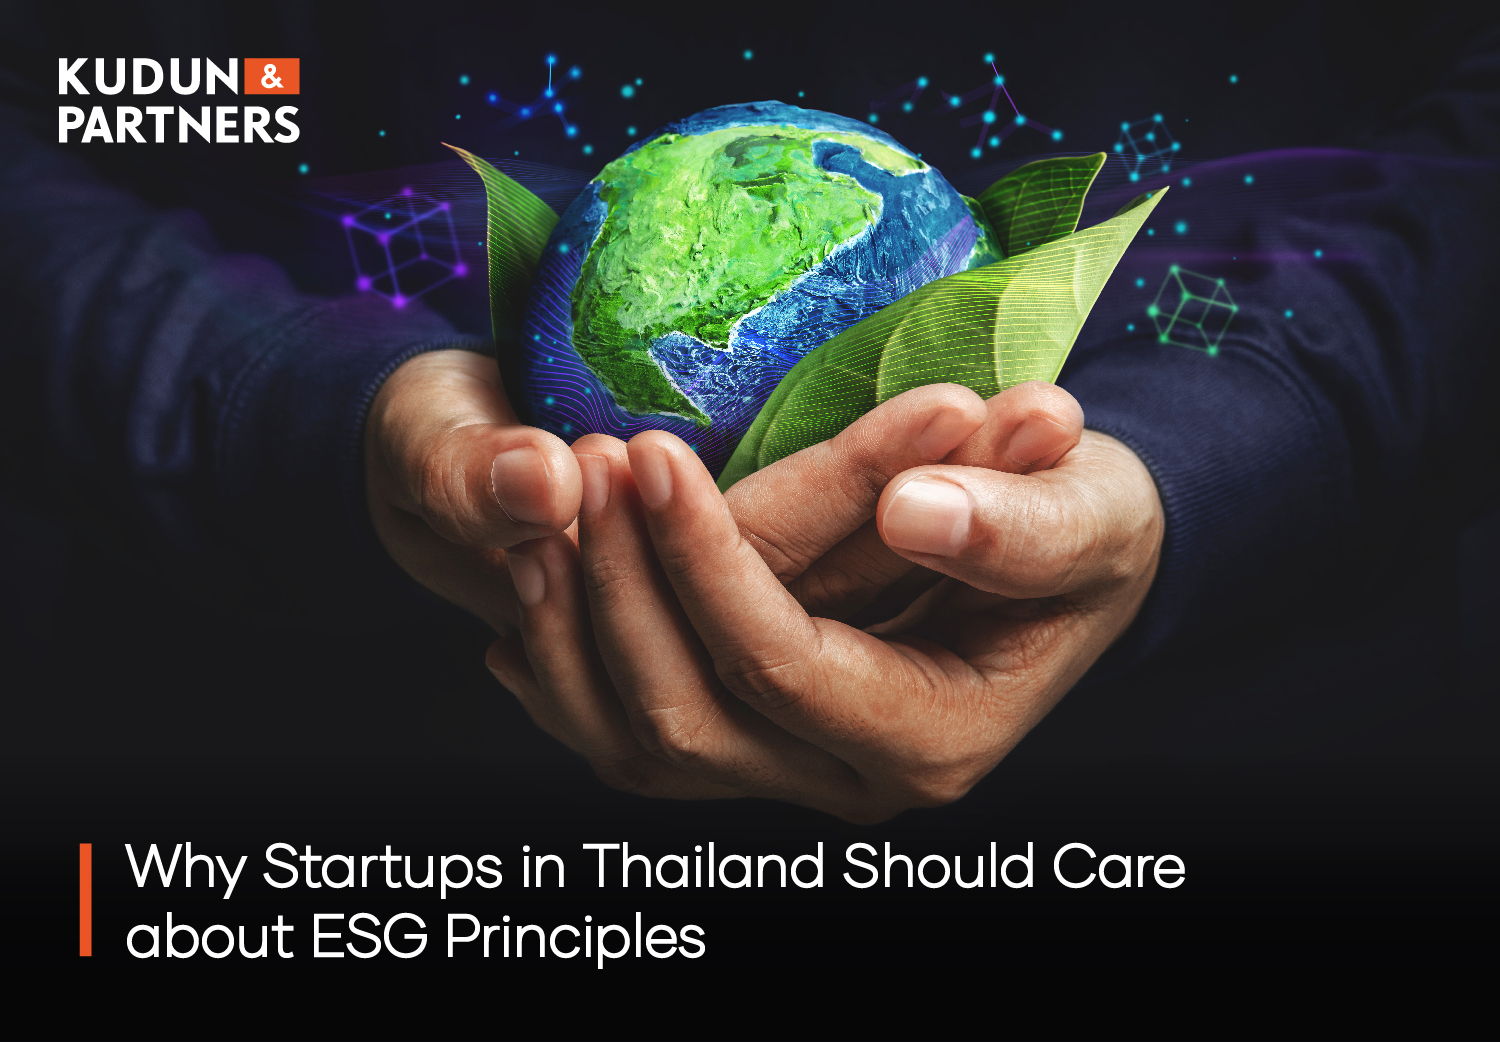 Why Startups in Thailand Should Care about ESG Principles